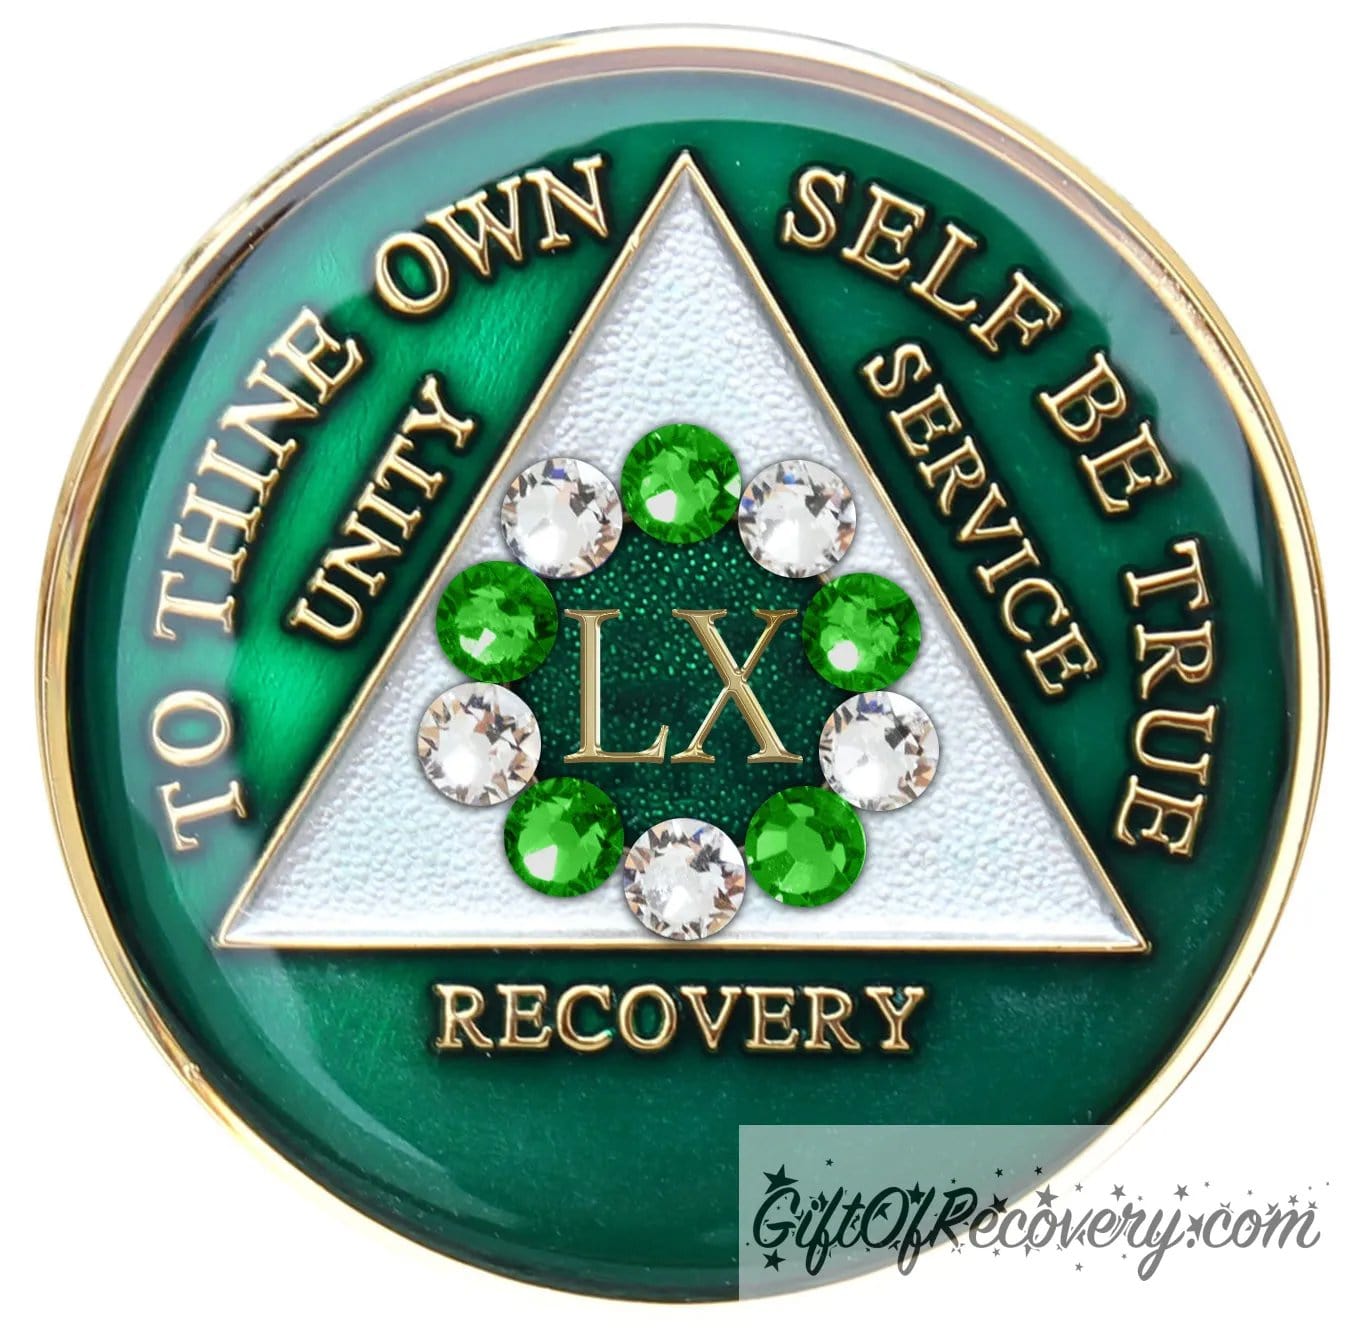 60 year emerald green AA medallion with the 10th step in emphasis in the center, 5 emerald green genuine crystals and 5 clear genuine crystals, inside the triangle is pearl white, while the circle is sparkle green. To thine own self be true, unity, service, recovery, and the roman numeral 1, are 14k gold and sealed with resin for a glossy finish.